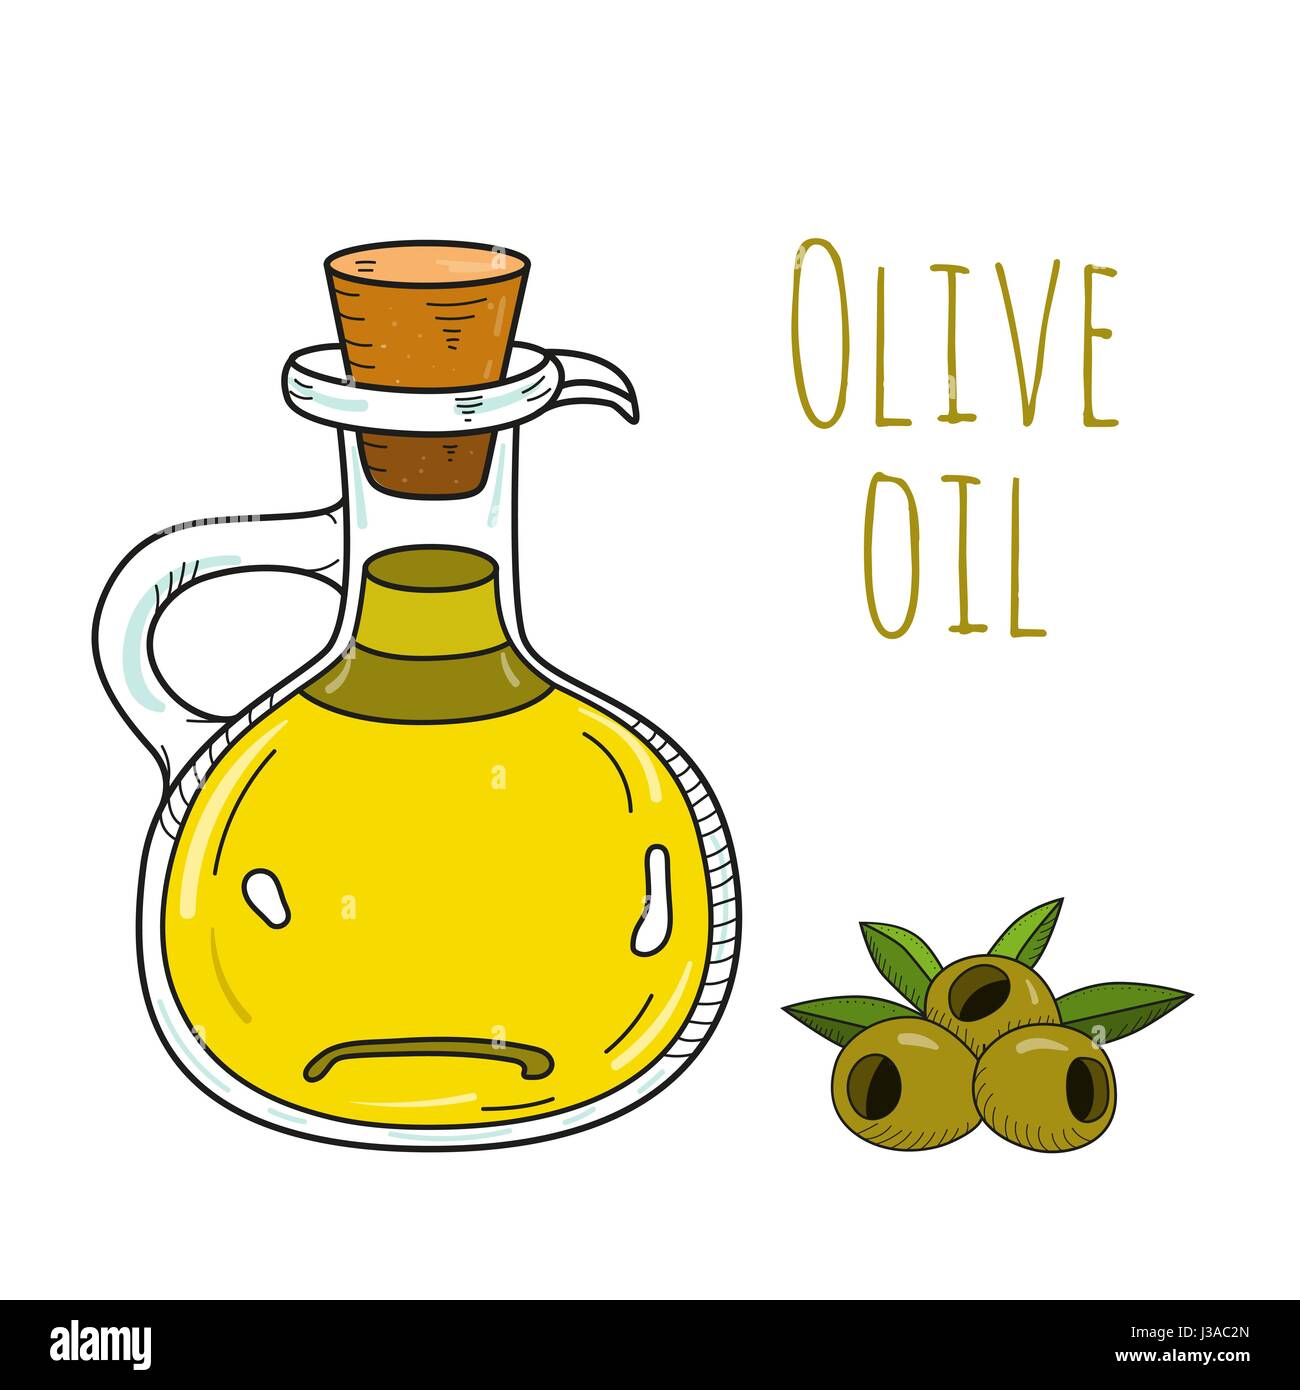 Colorful hand drawn olive oil bottle Stock Vector